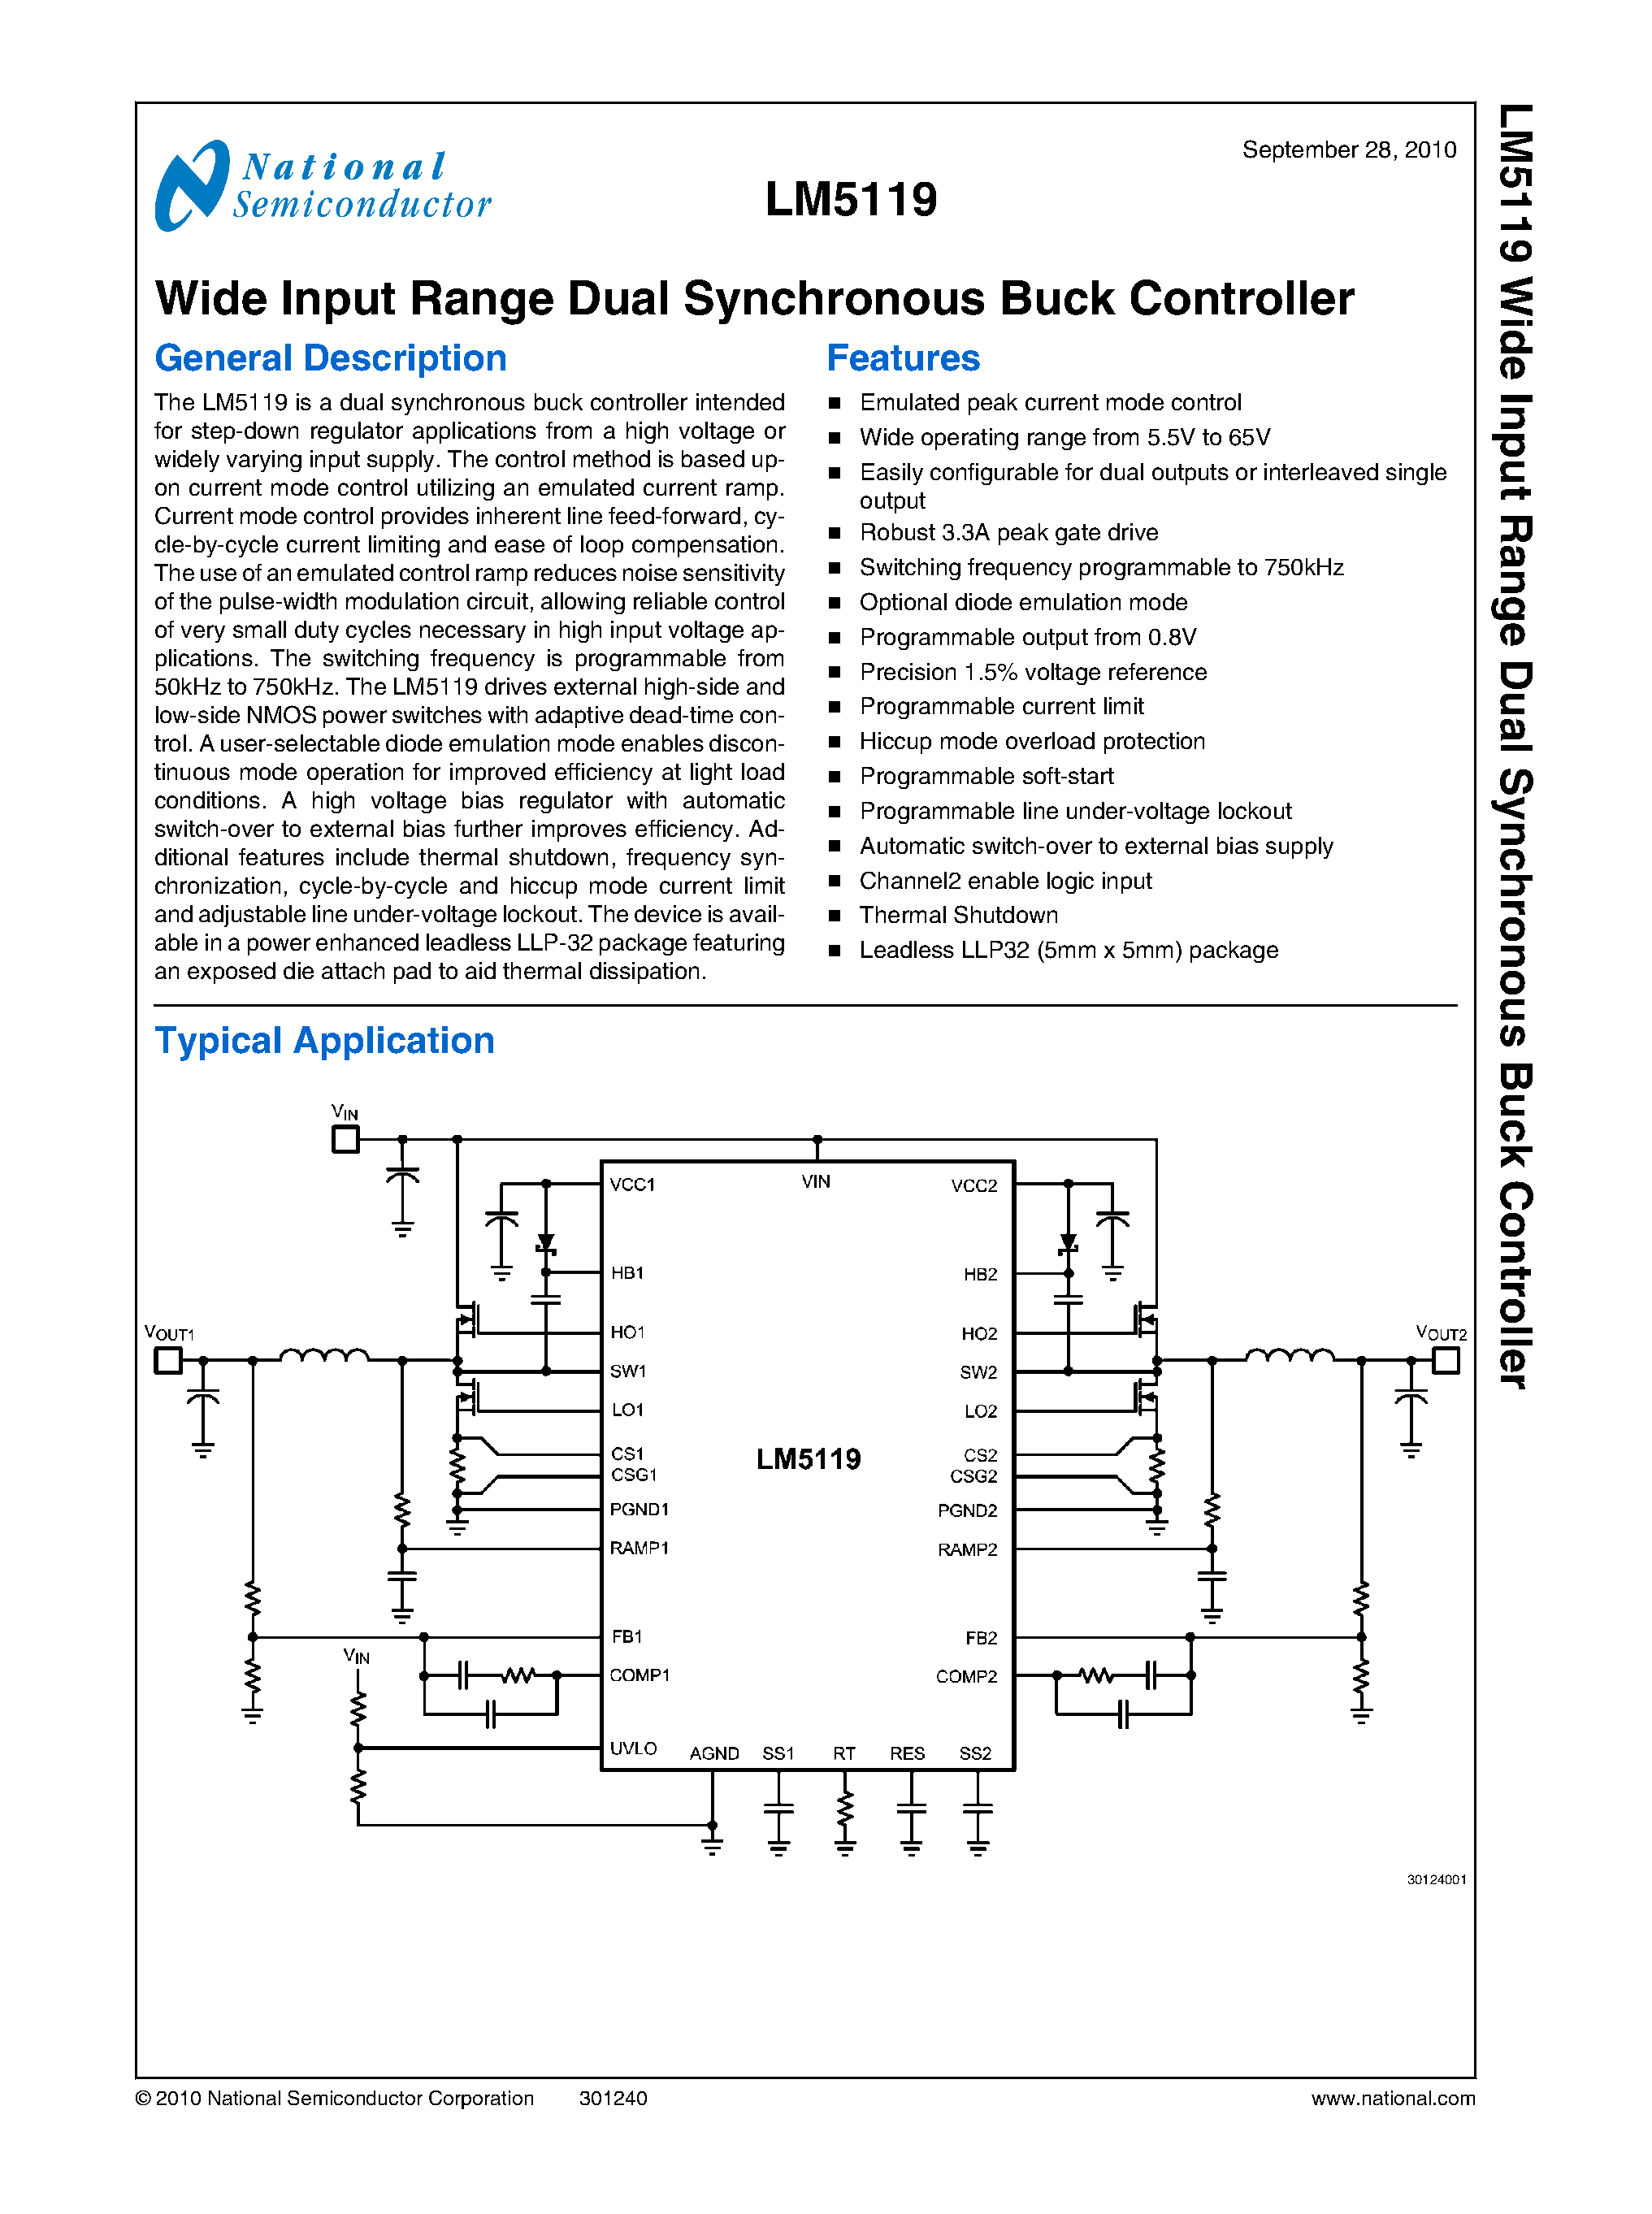 Datasheet LM5119 - Wide Input Range Dual Synchronous Buck Controller page 1